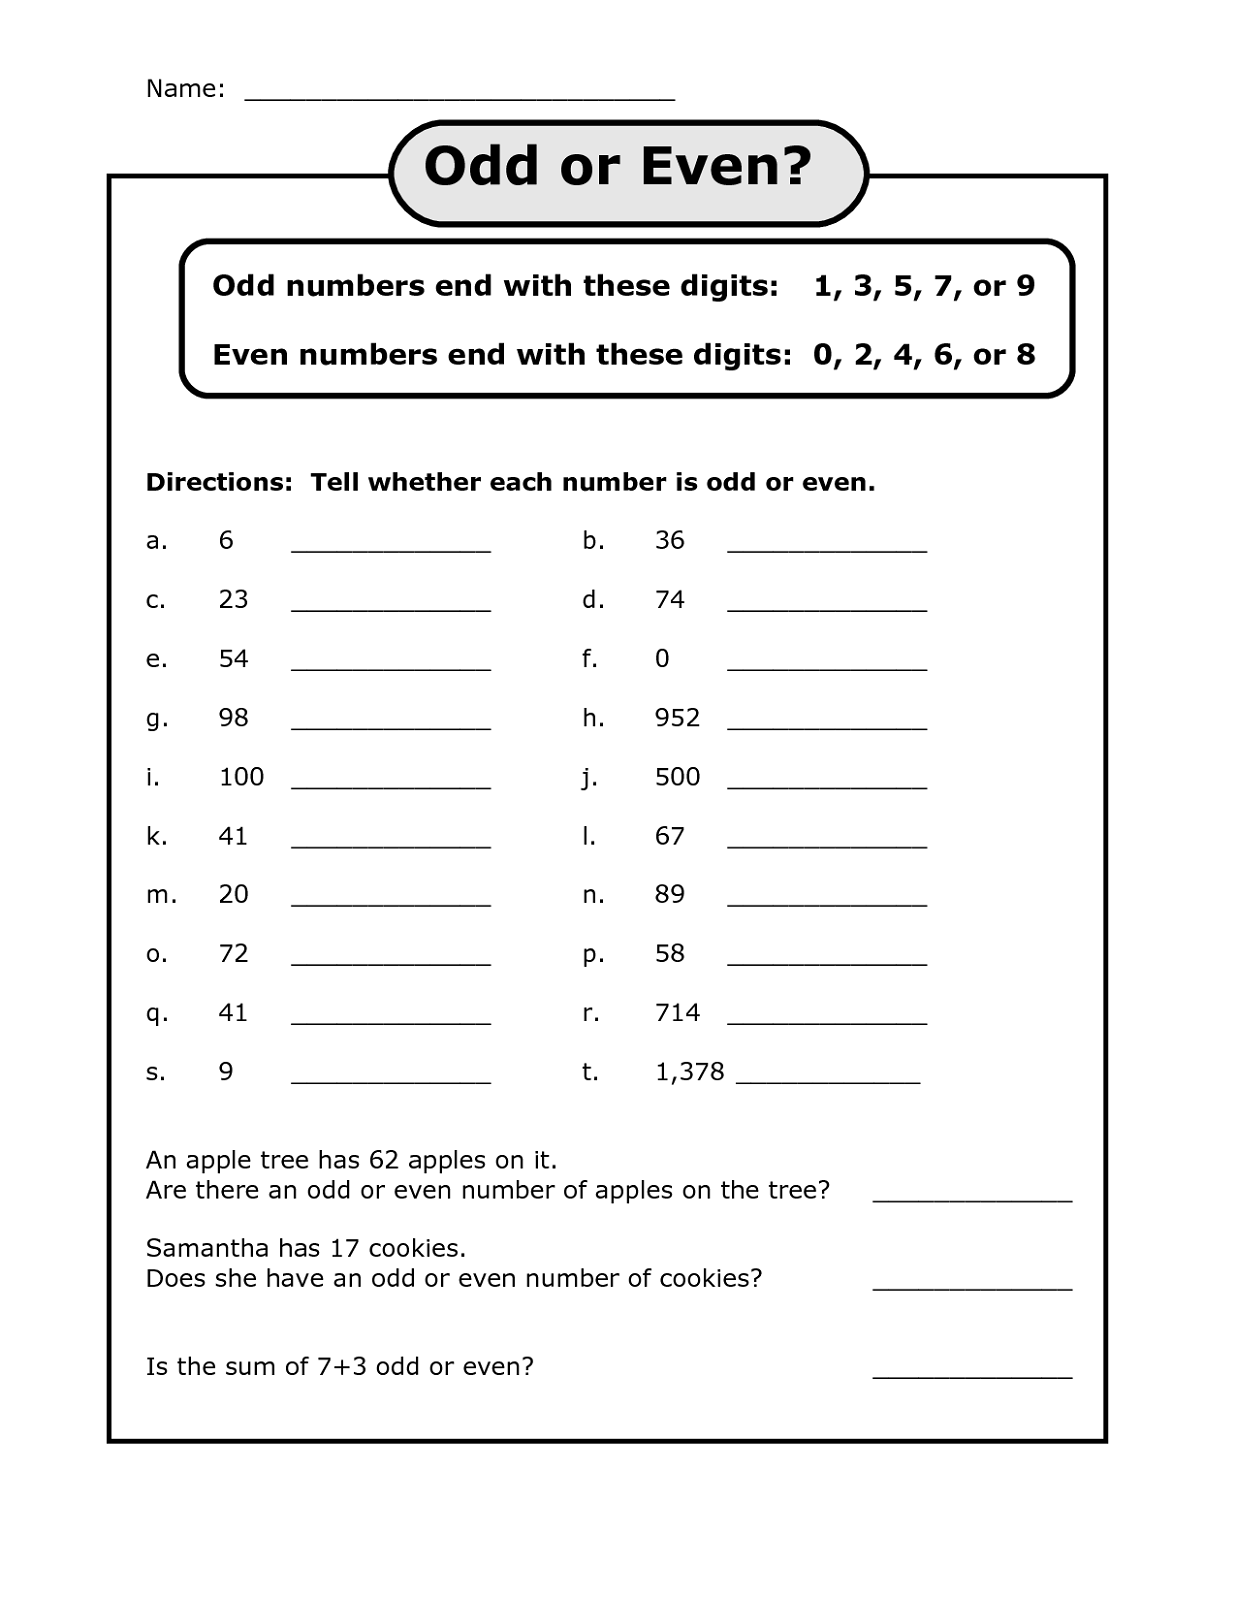 2nd-grade-odd-and-even-numbers-worksheets-kidsworksheetfun-odd-and-even-number-worksheets